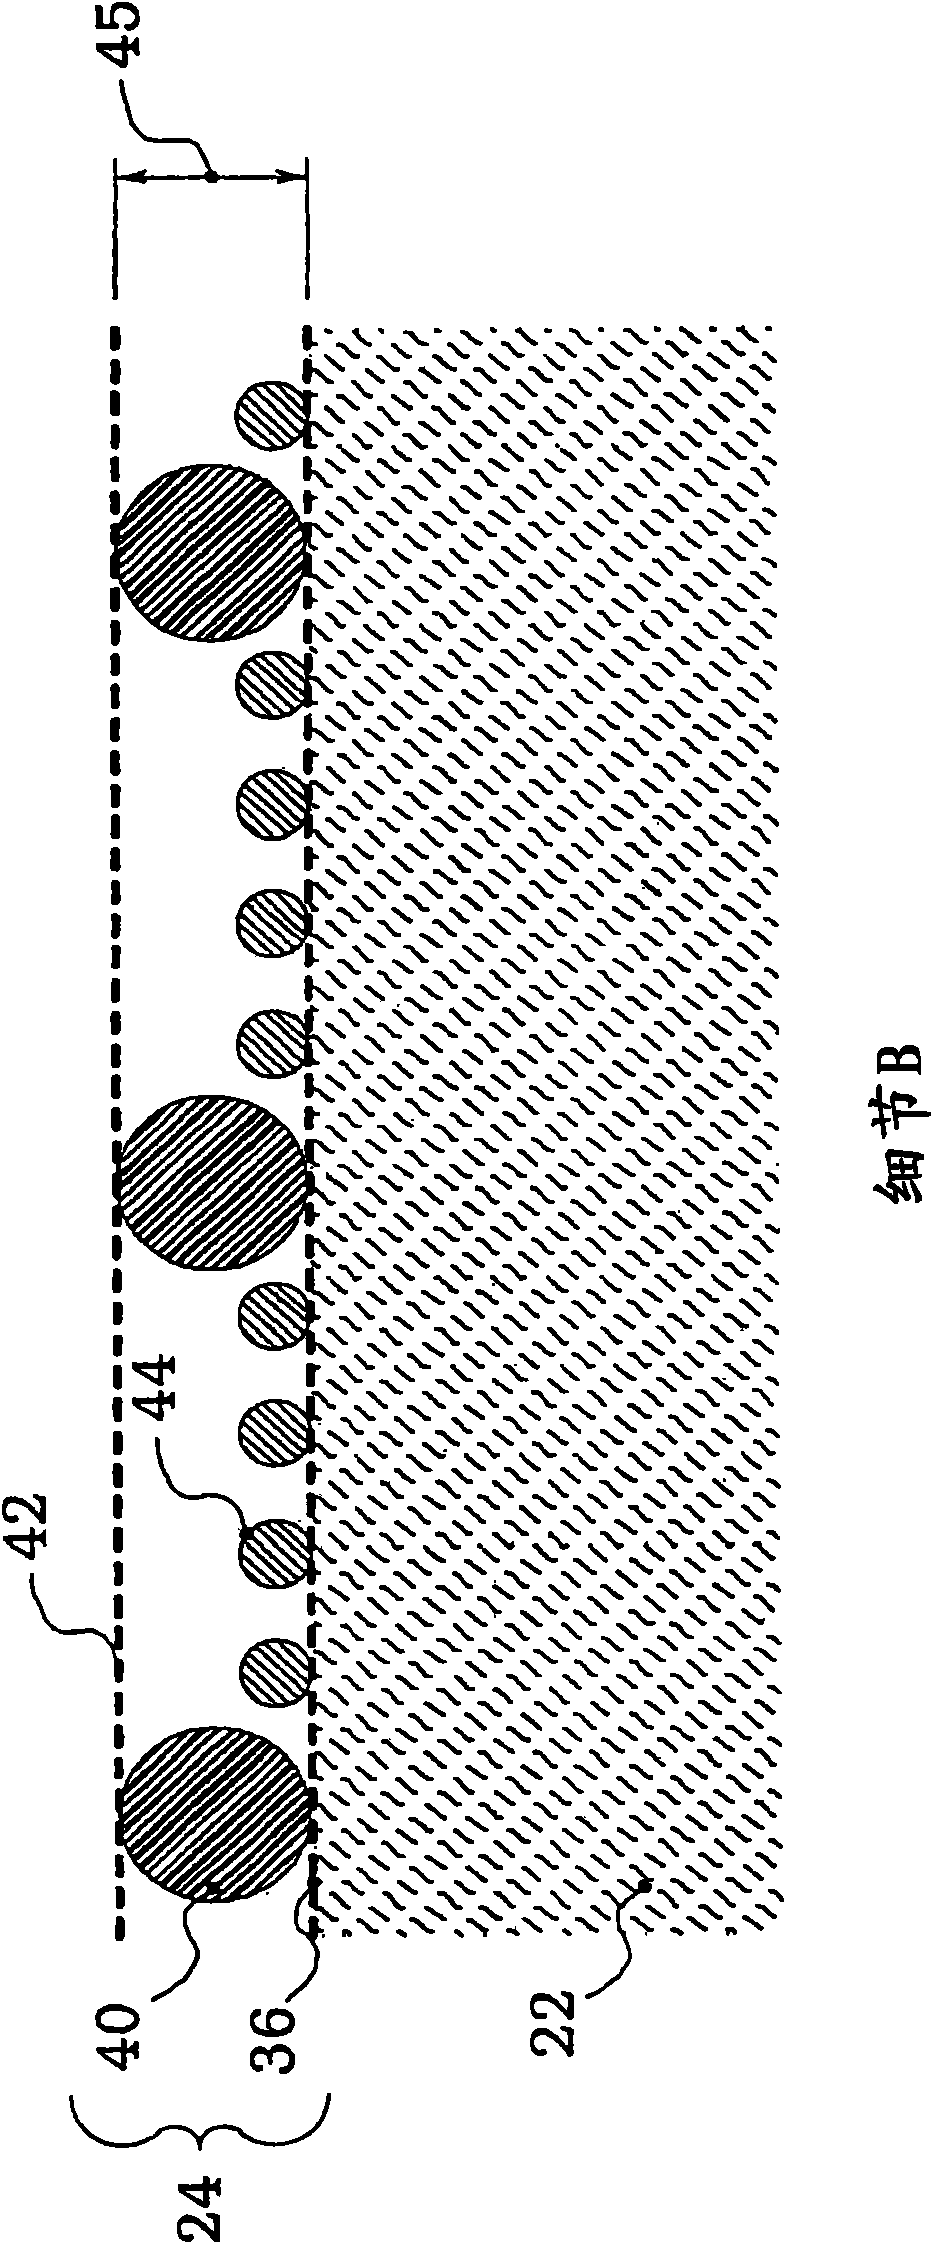 System and method for the treatment of diesel exhaust particulate matter